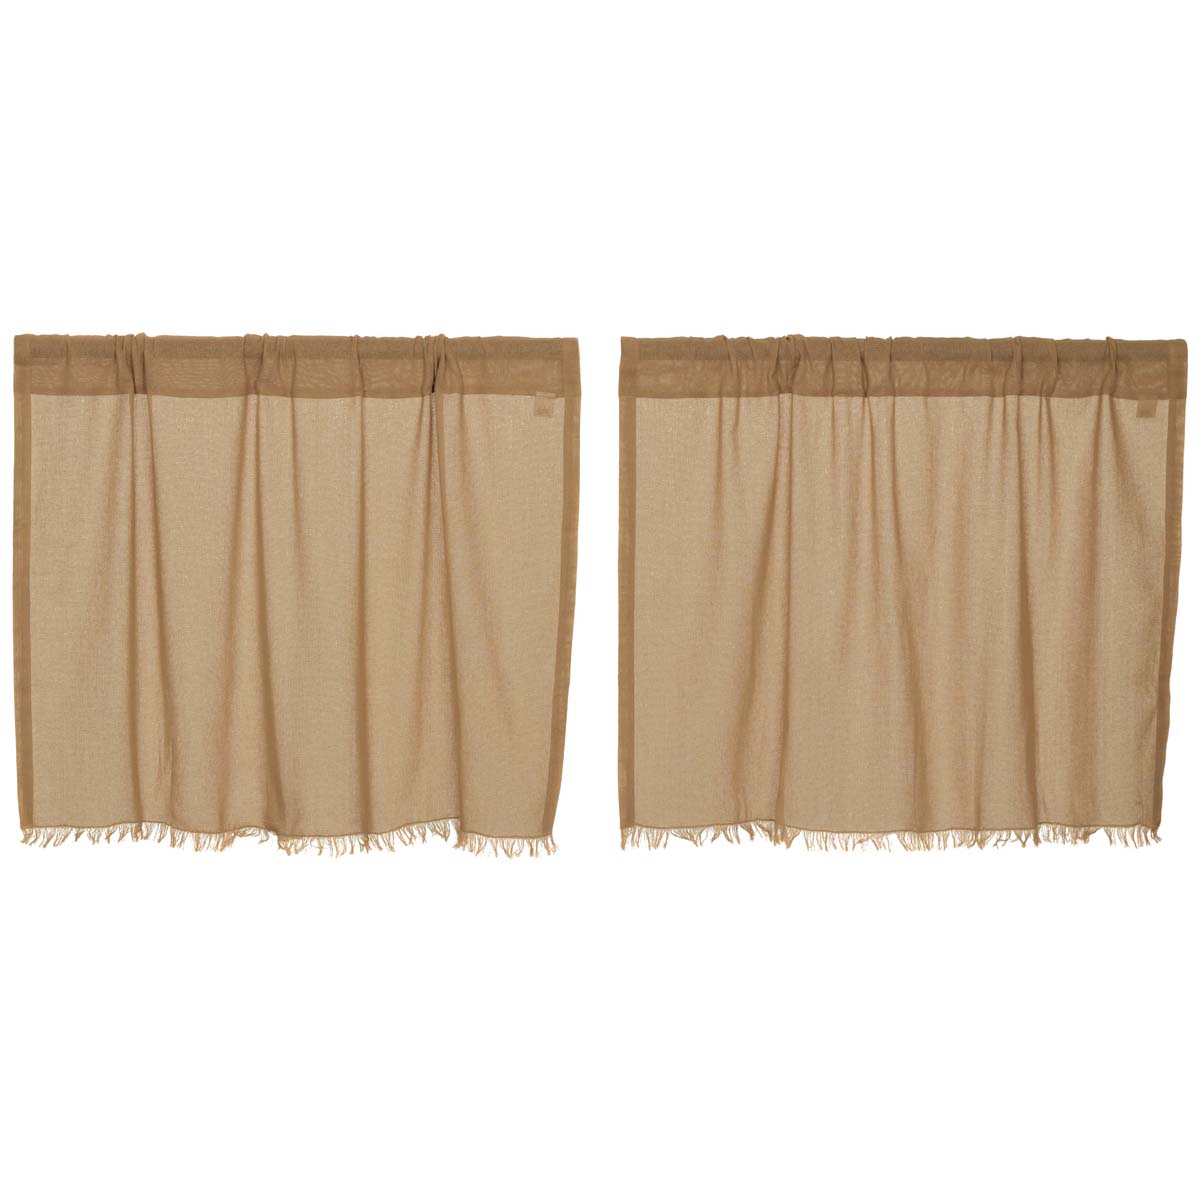 April & Olive Tobacco Cloth Khaki Tier Fringed Set of 2 L24xW36 By VHC Brands